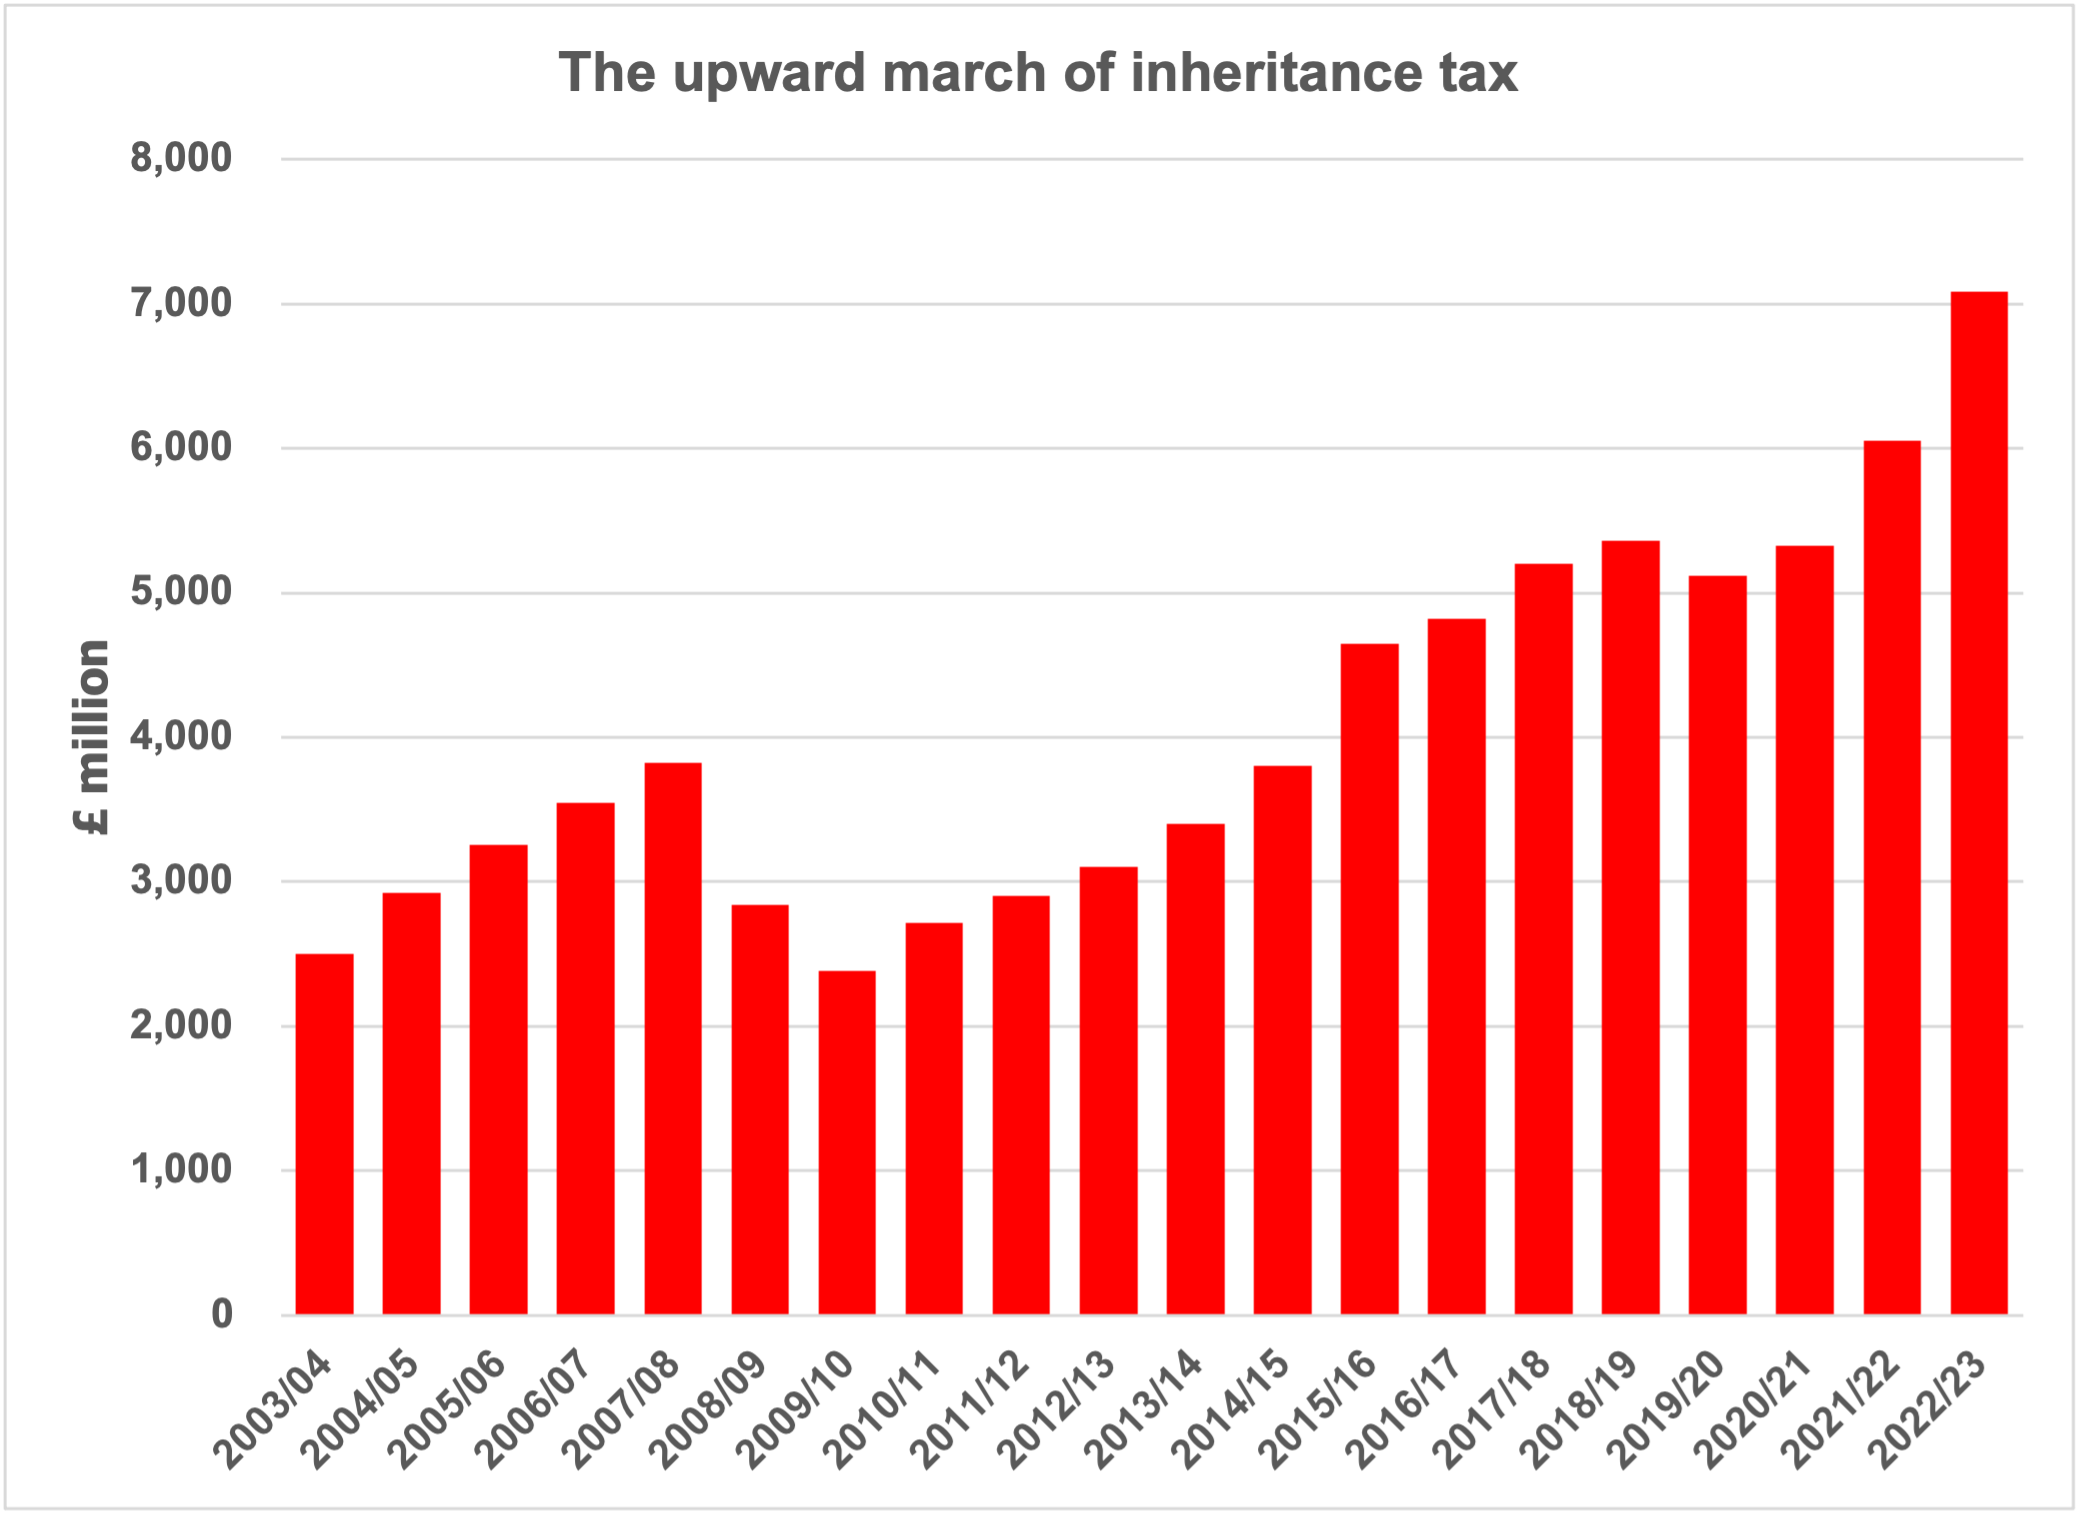 A graph depicting the rise of inheritance tax